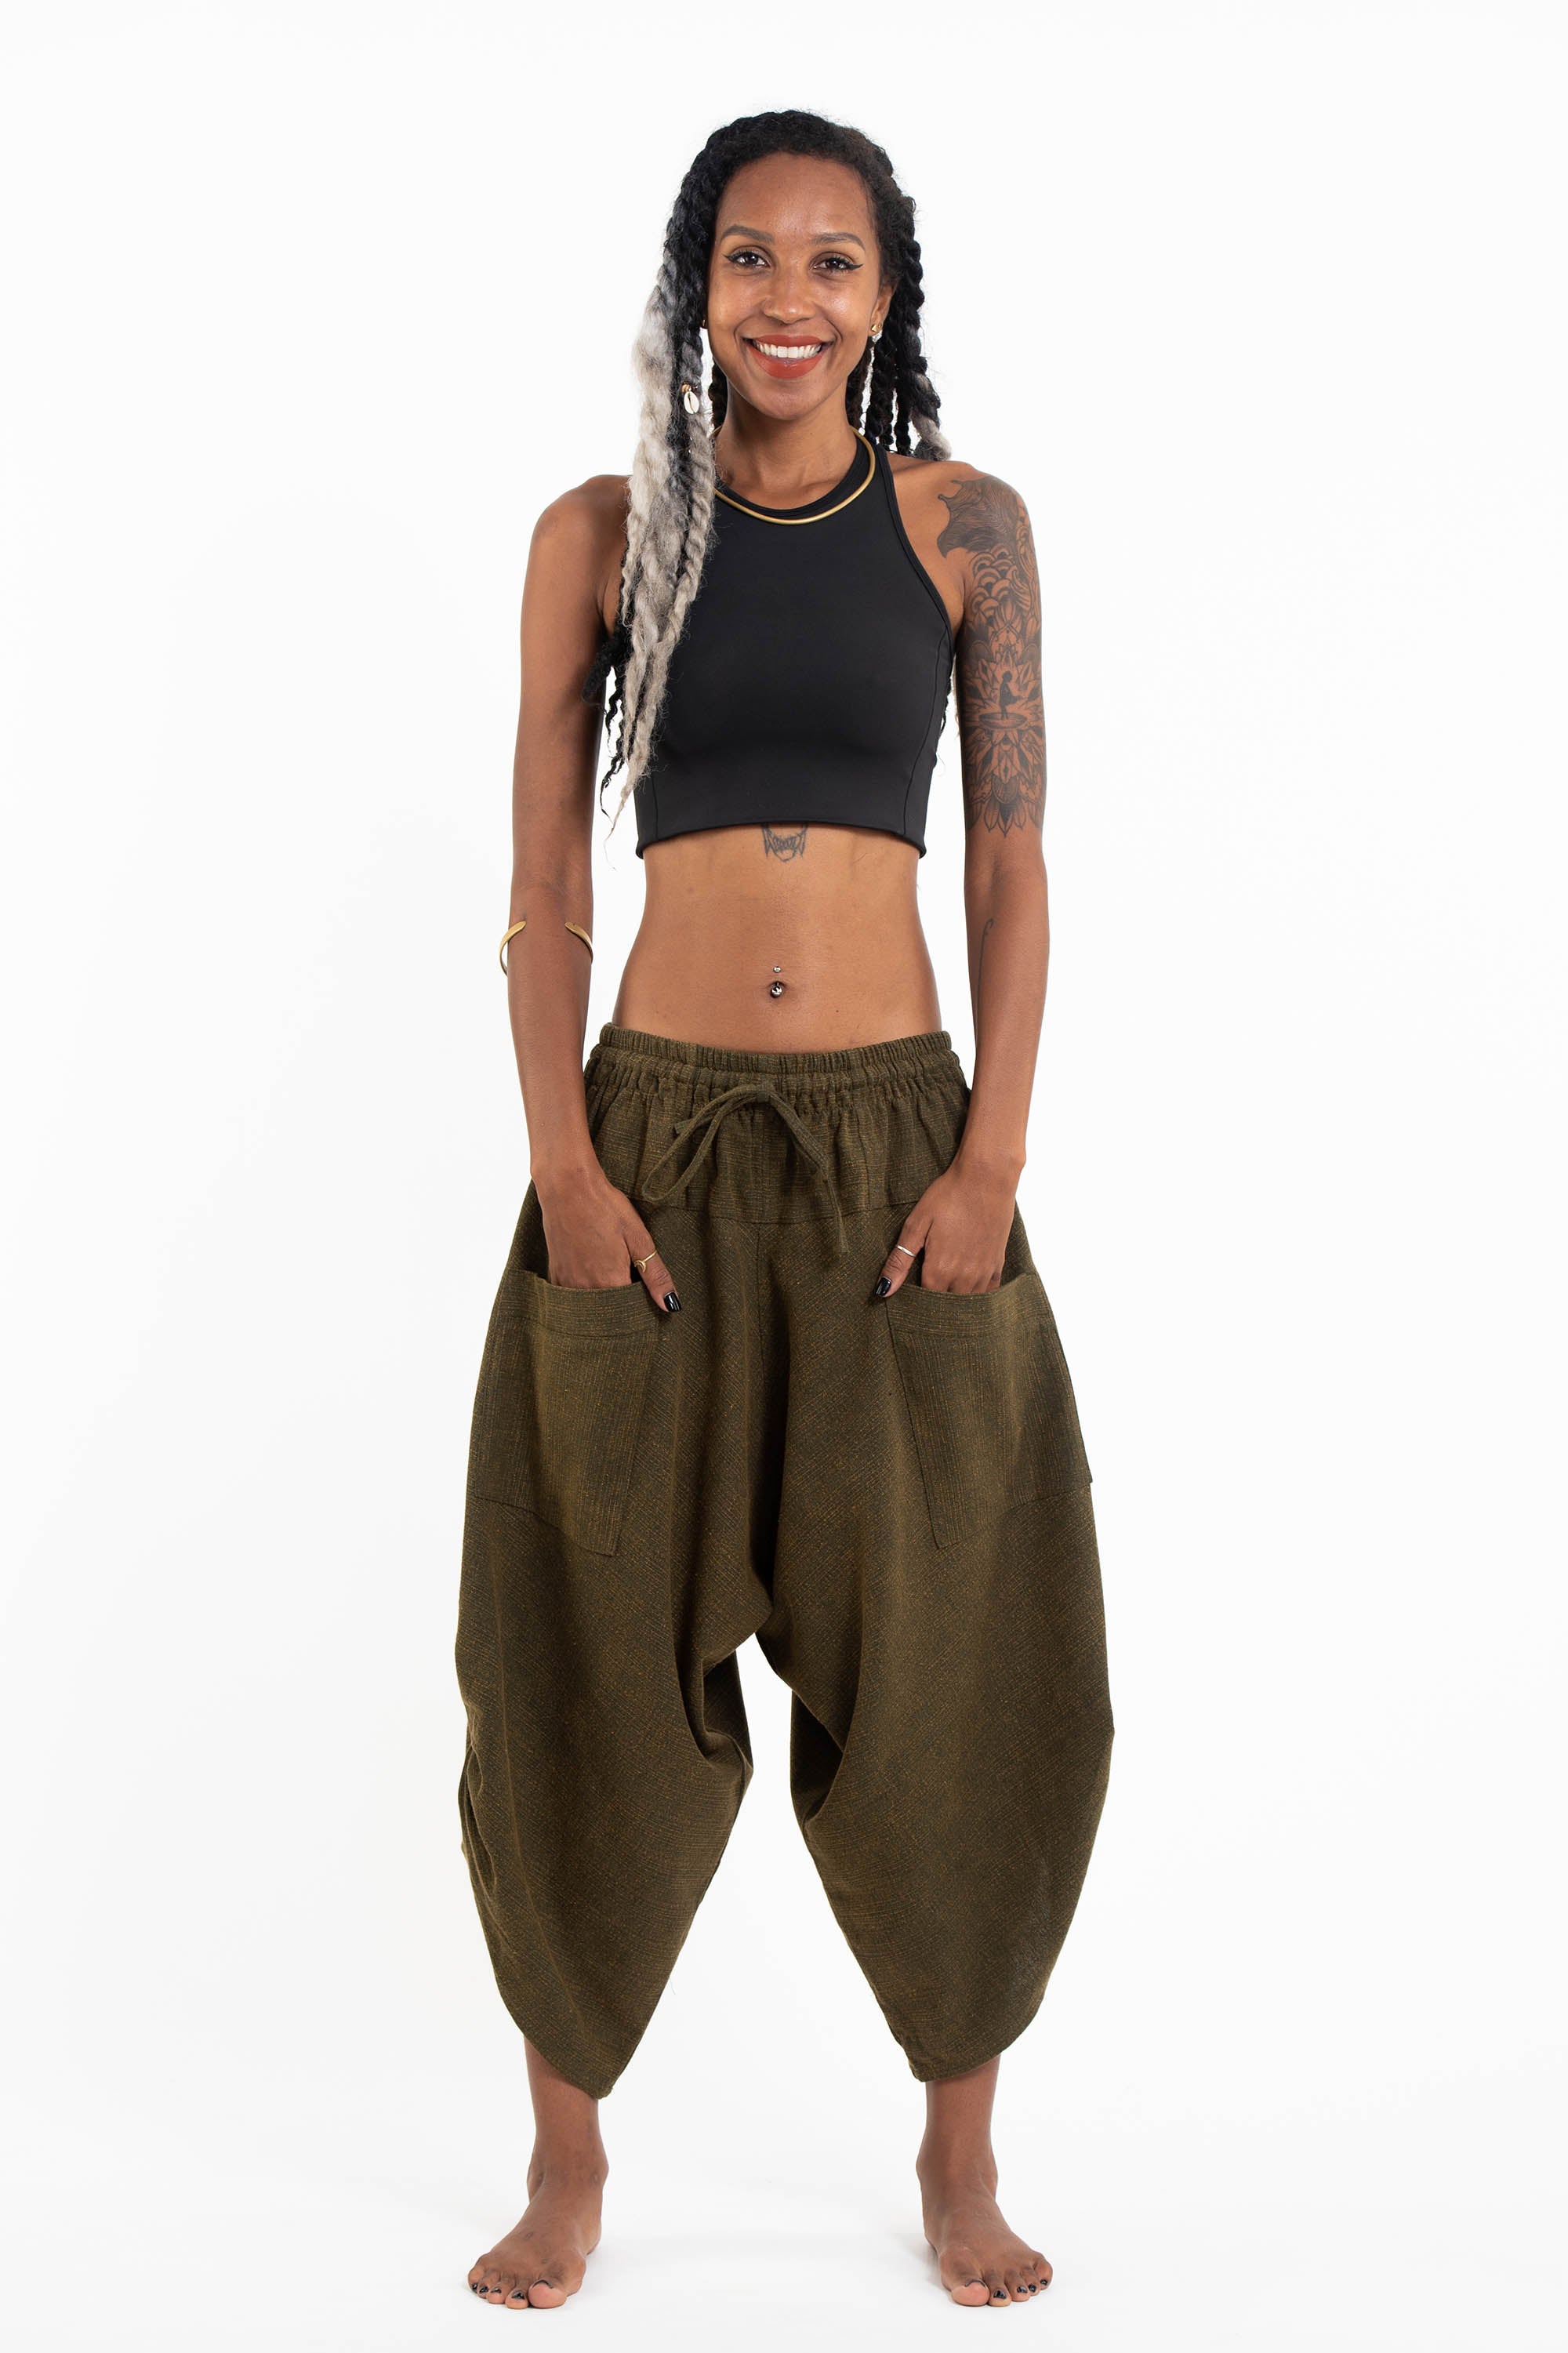 Stone Washed Large Pockets Women's Harem Pants in Olive Green